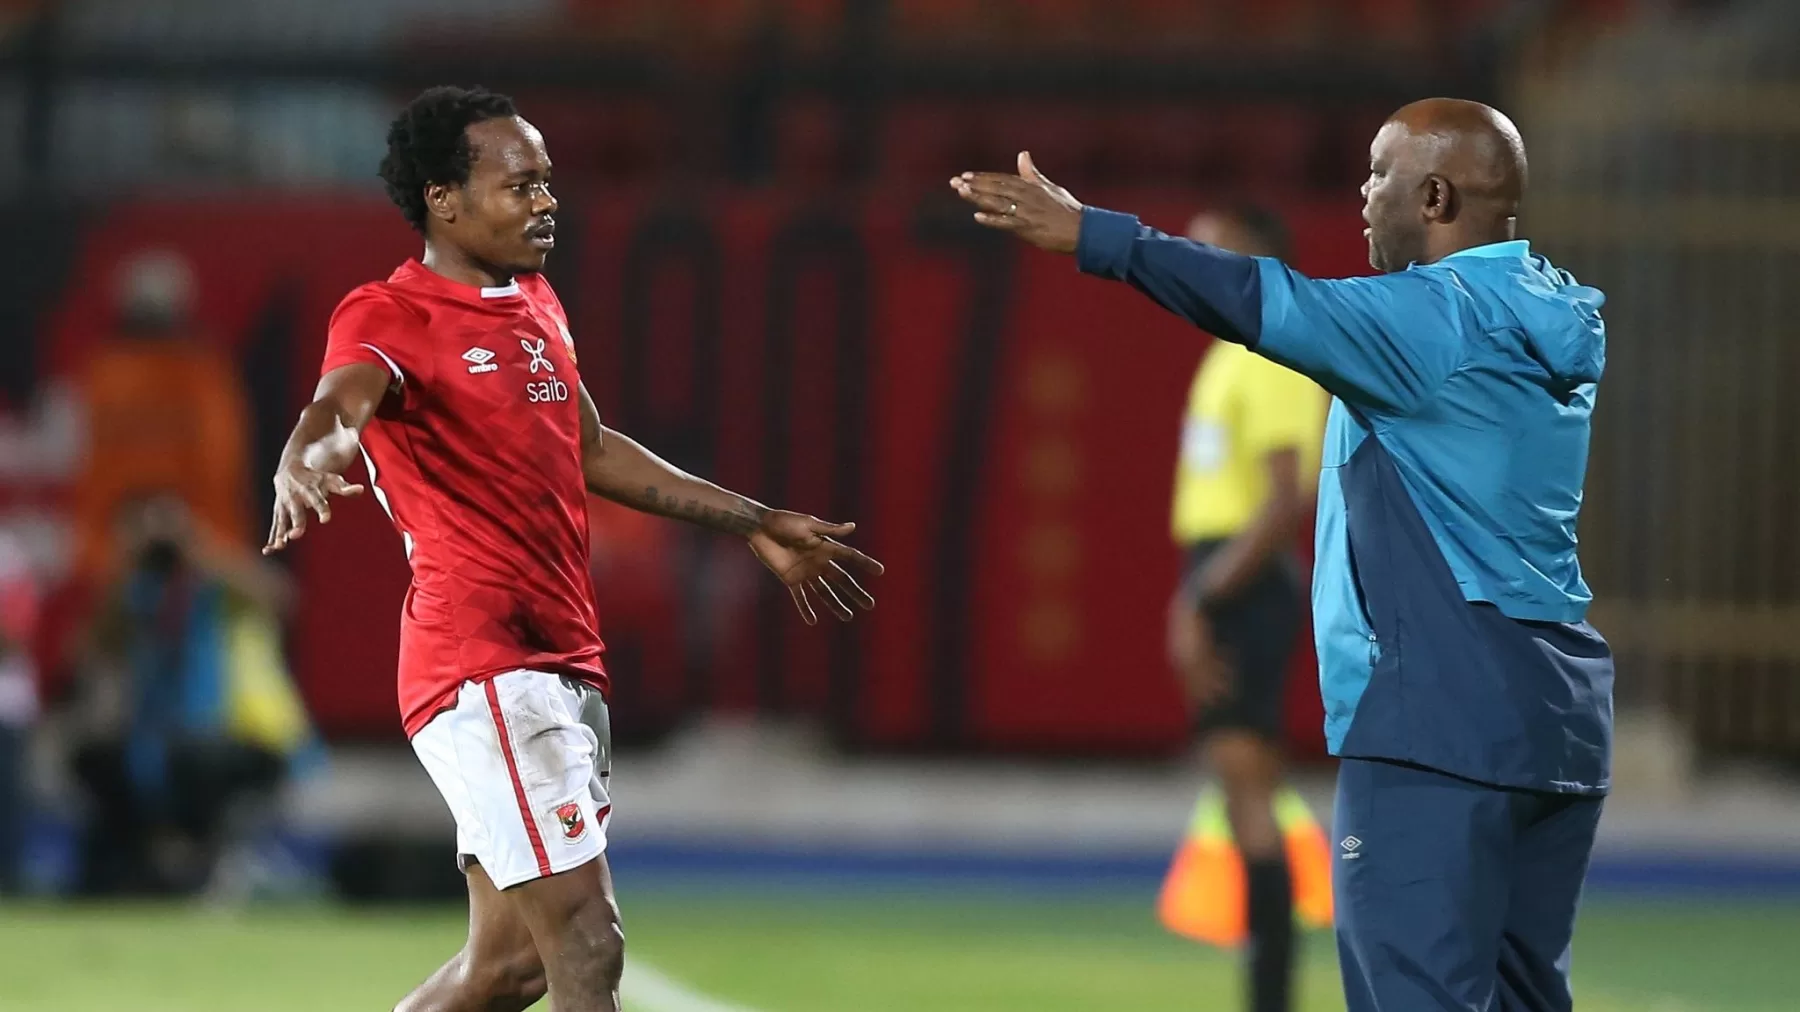 Pitso Mosimane has singled out Percy Tau as the one former player he would put his head on the block for